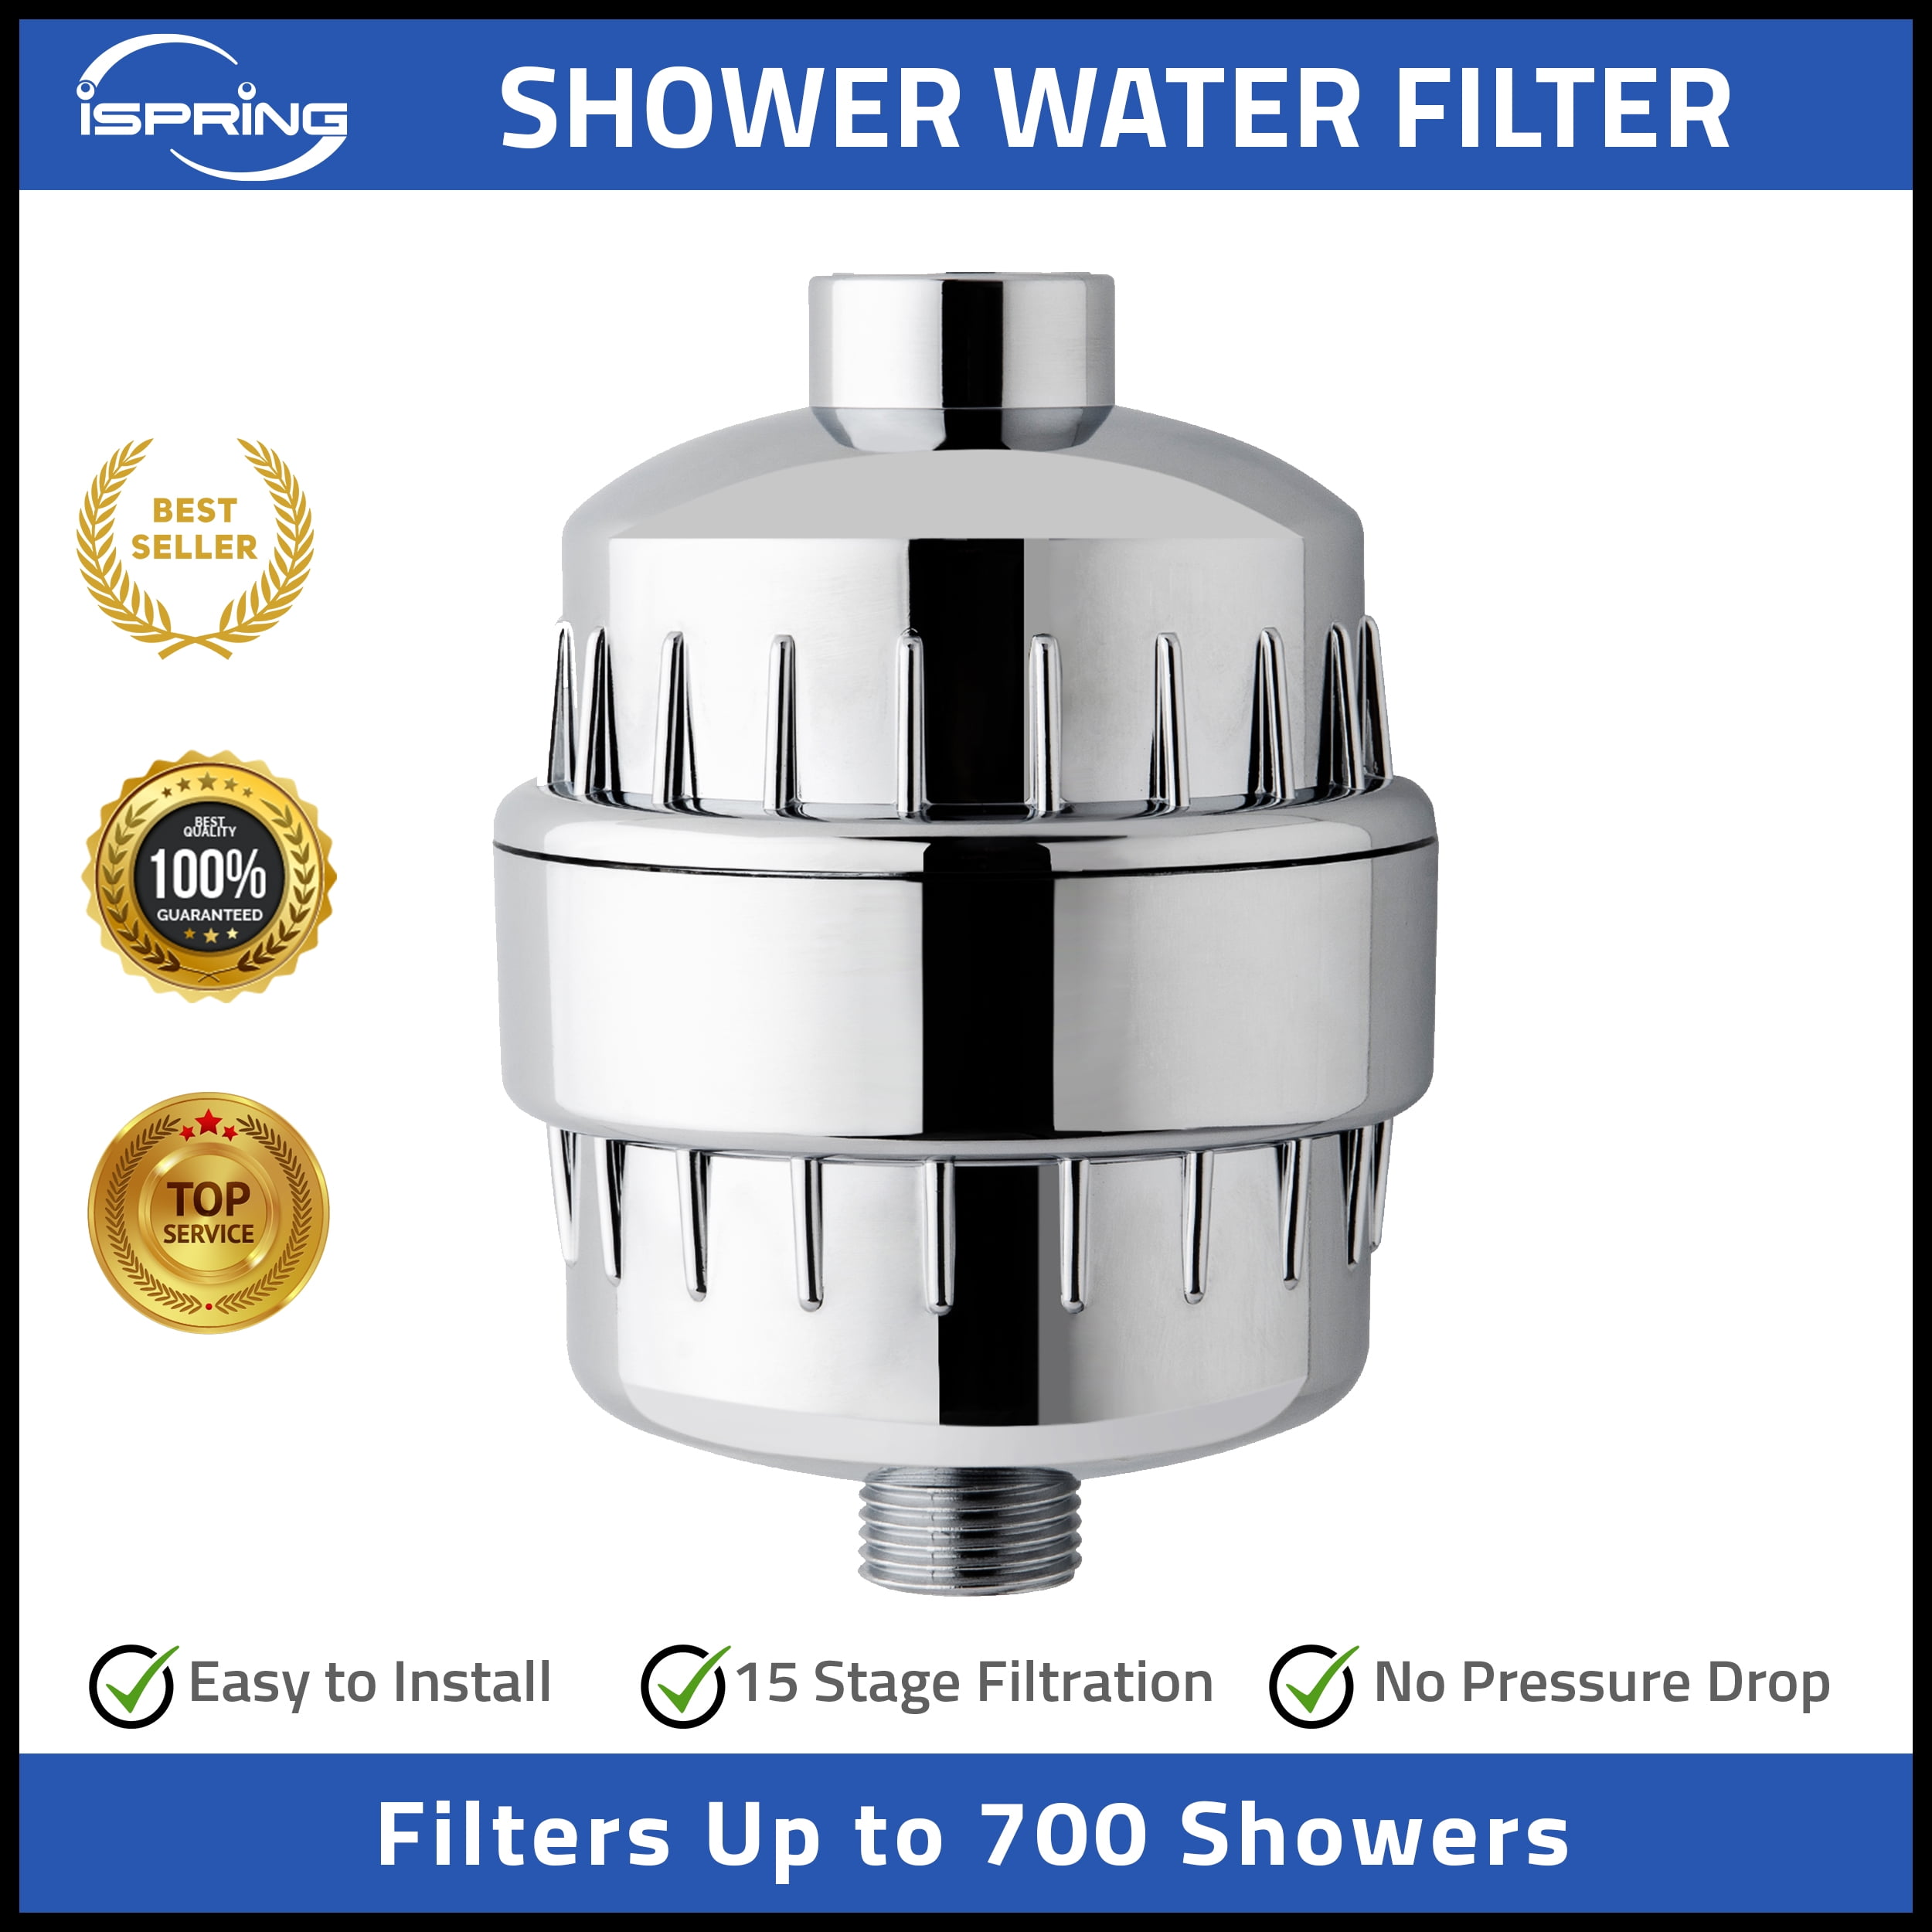 High Output 15-Stage Shower Filter 2× Filter Cartridges Included US SHIPPING 